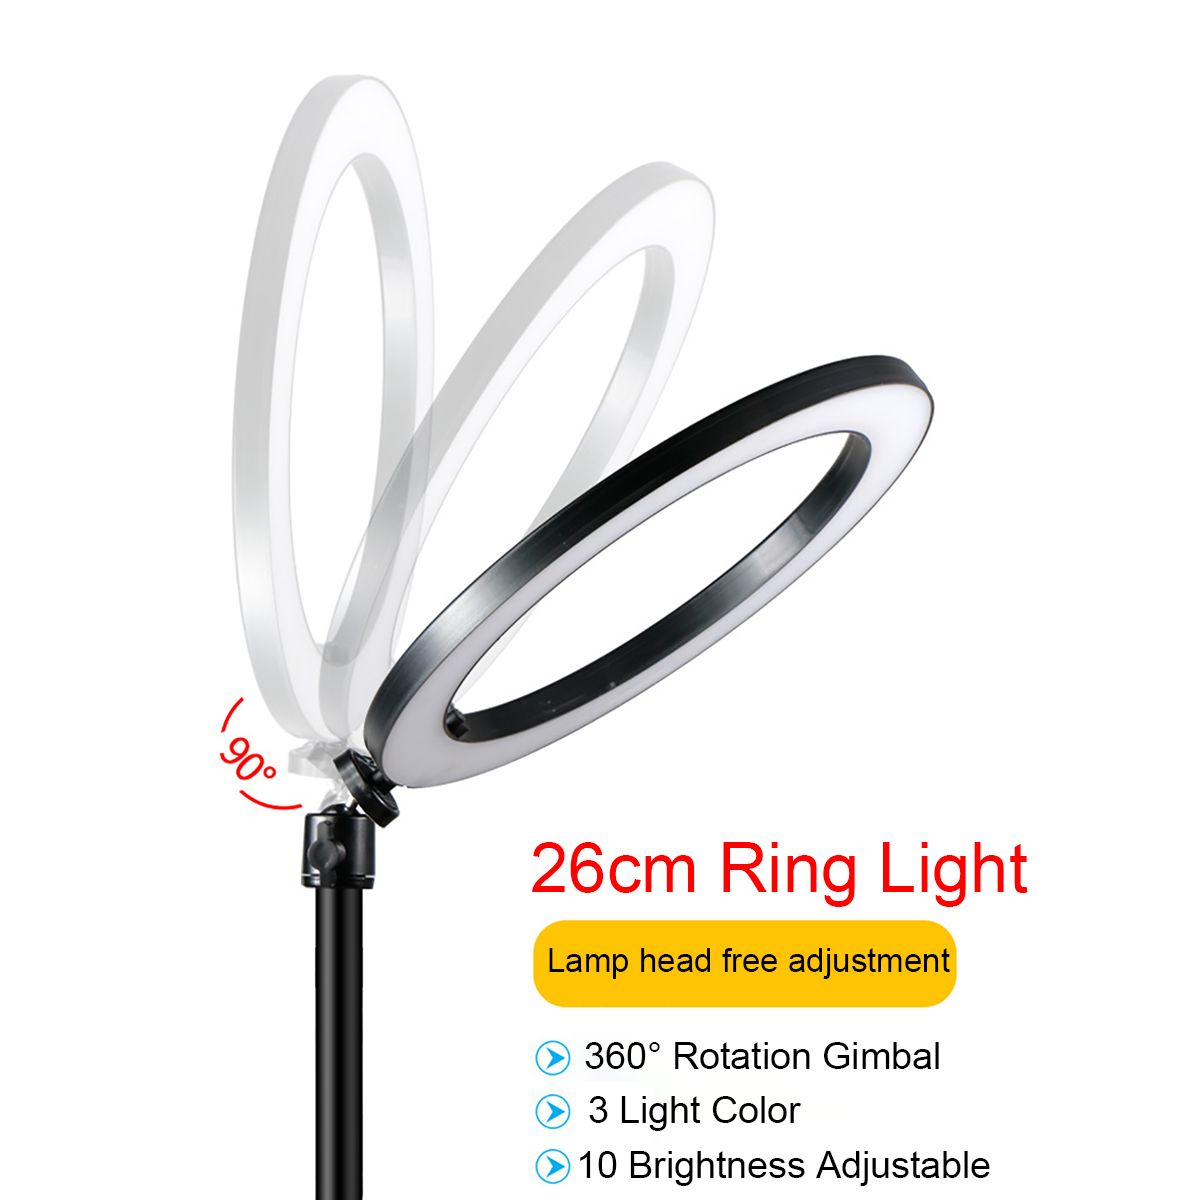 10-Inch-LED-Dimmable-Video-Ring-Light-Tripod-Stand-with-Phone-Holder-bluetooth-Selfie-Shutter-for-Yo-1610615